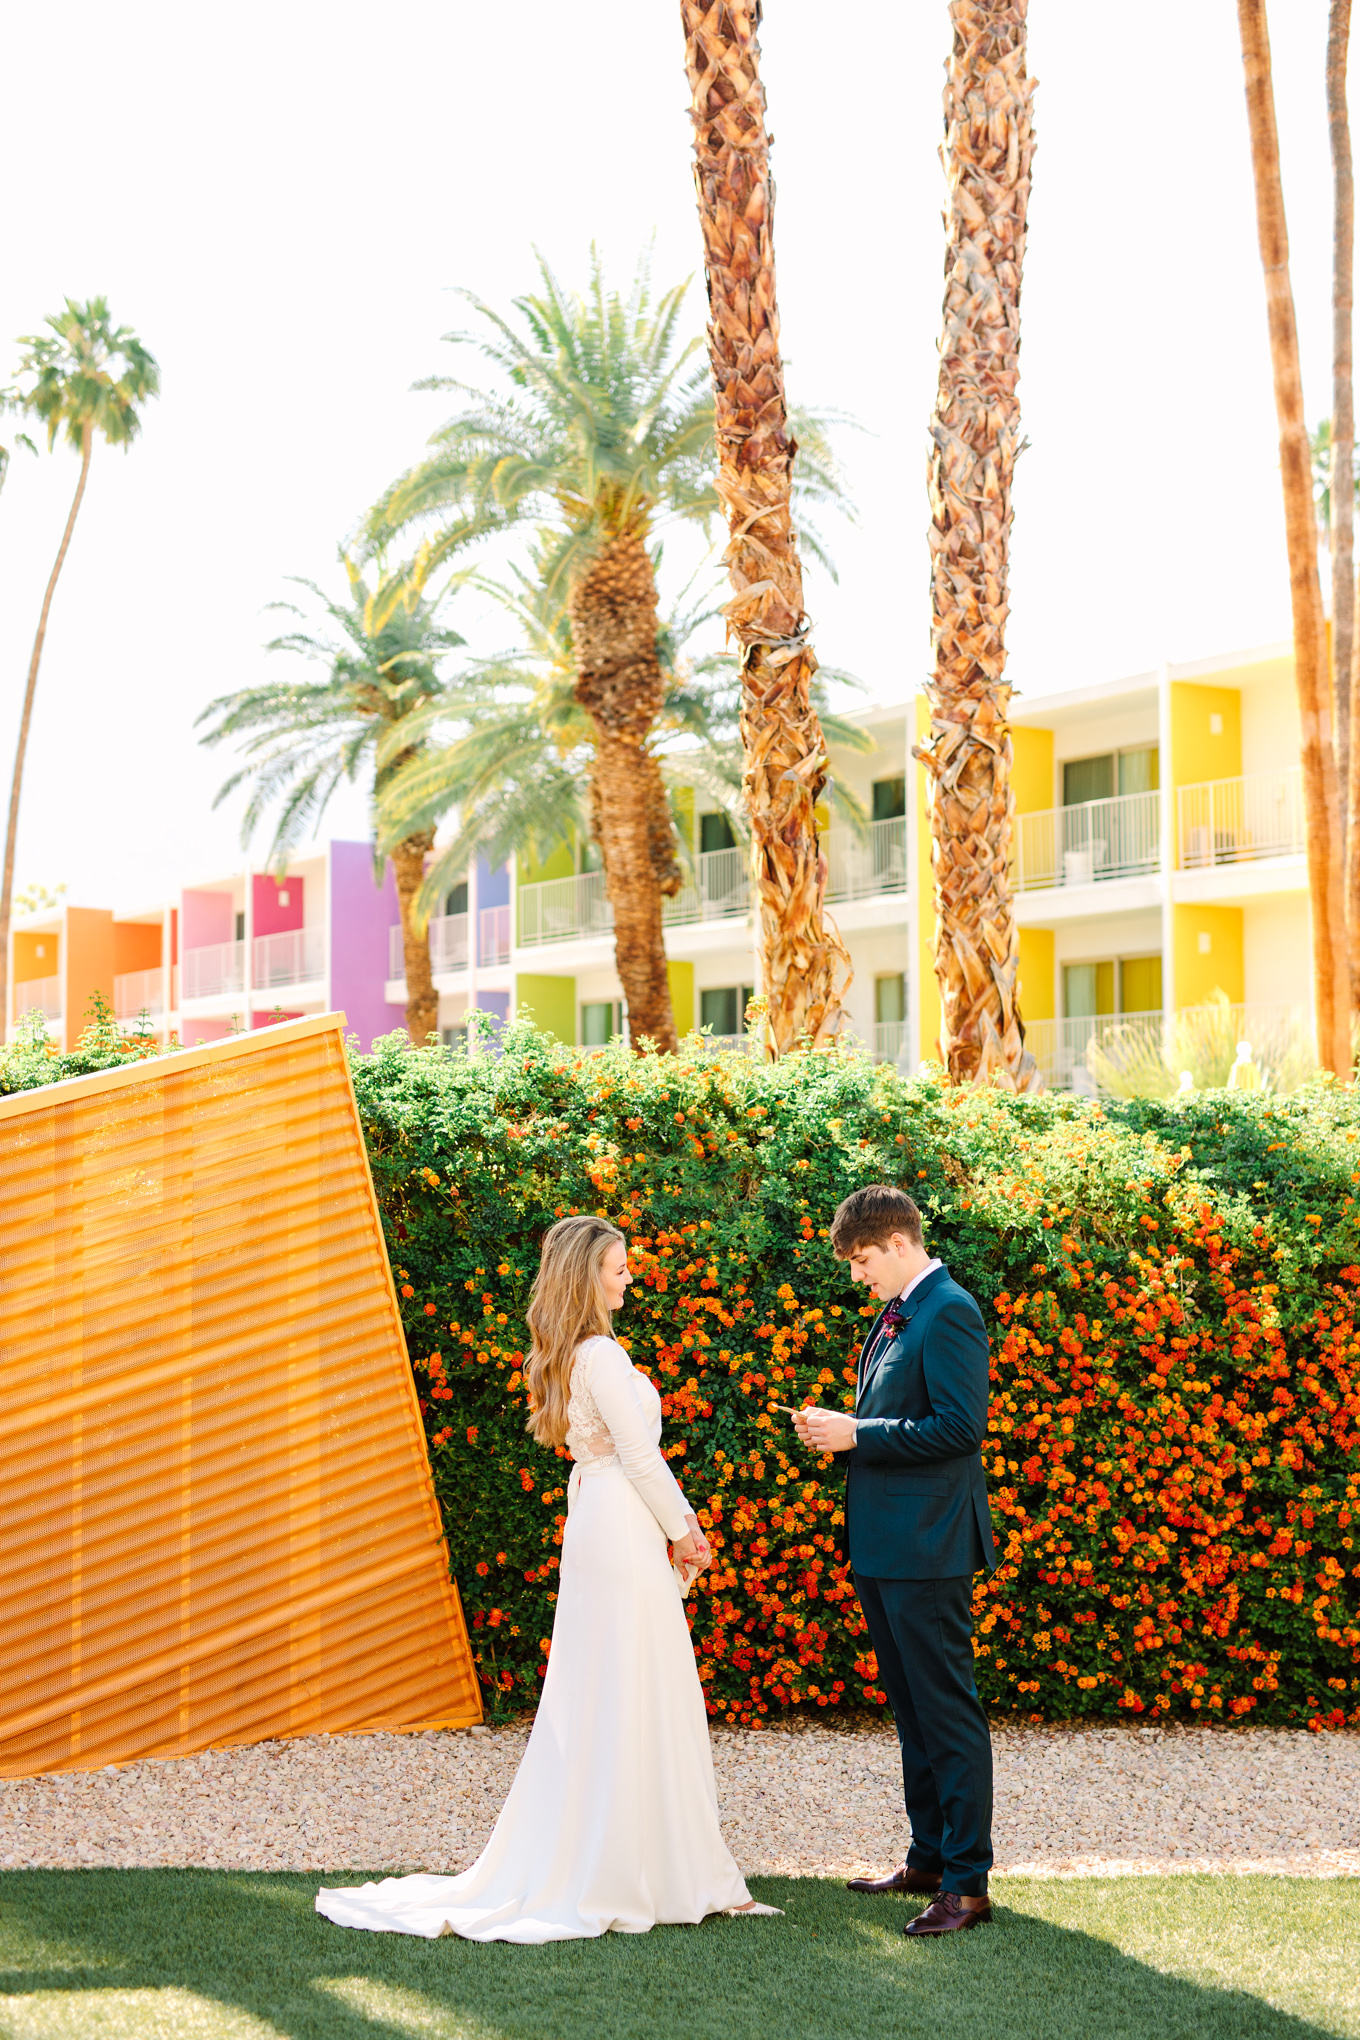 Vow exchange at Saguaro Hotel | Colorful jewel tone Palm Springs elopement | Fresh and colorful photography for fun-loving couples in Southern California | #colorfulelopement #palmspringselopement #elopementphotography #palmspringswedding Source: Mary Costa Photography | Los Angeles